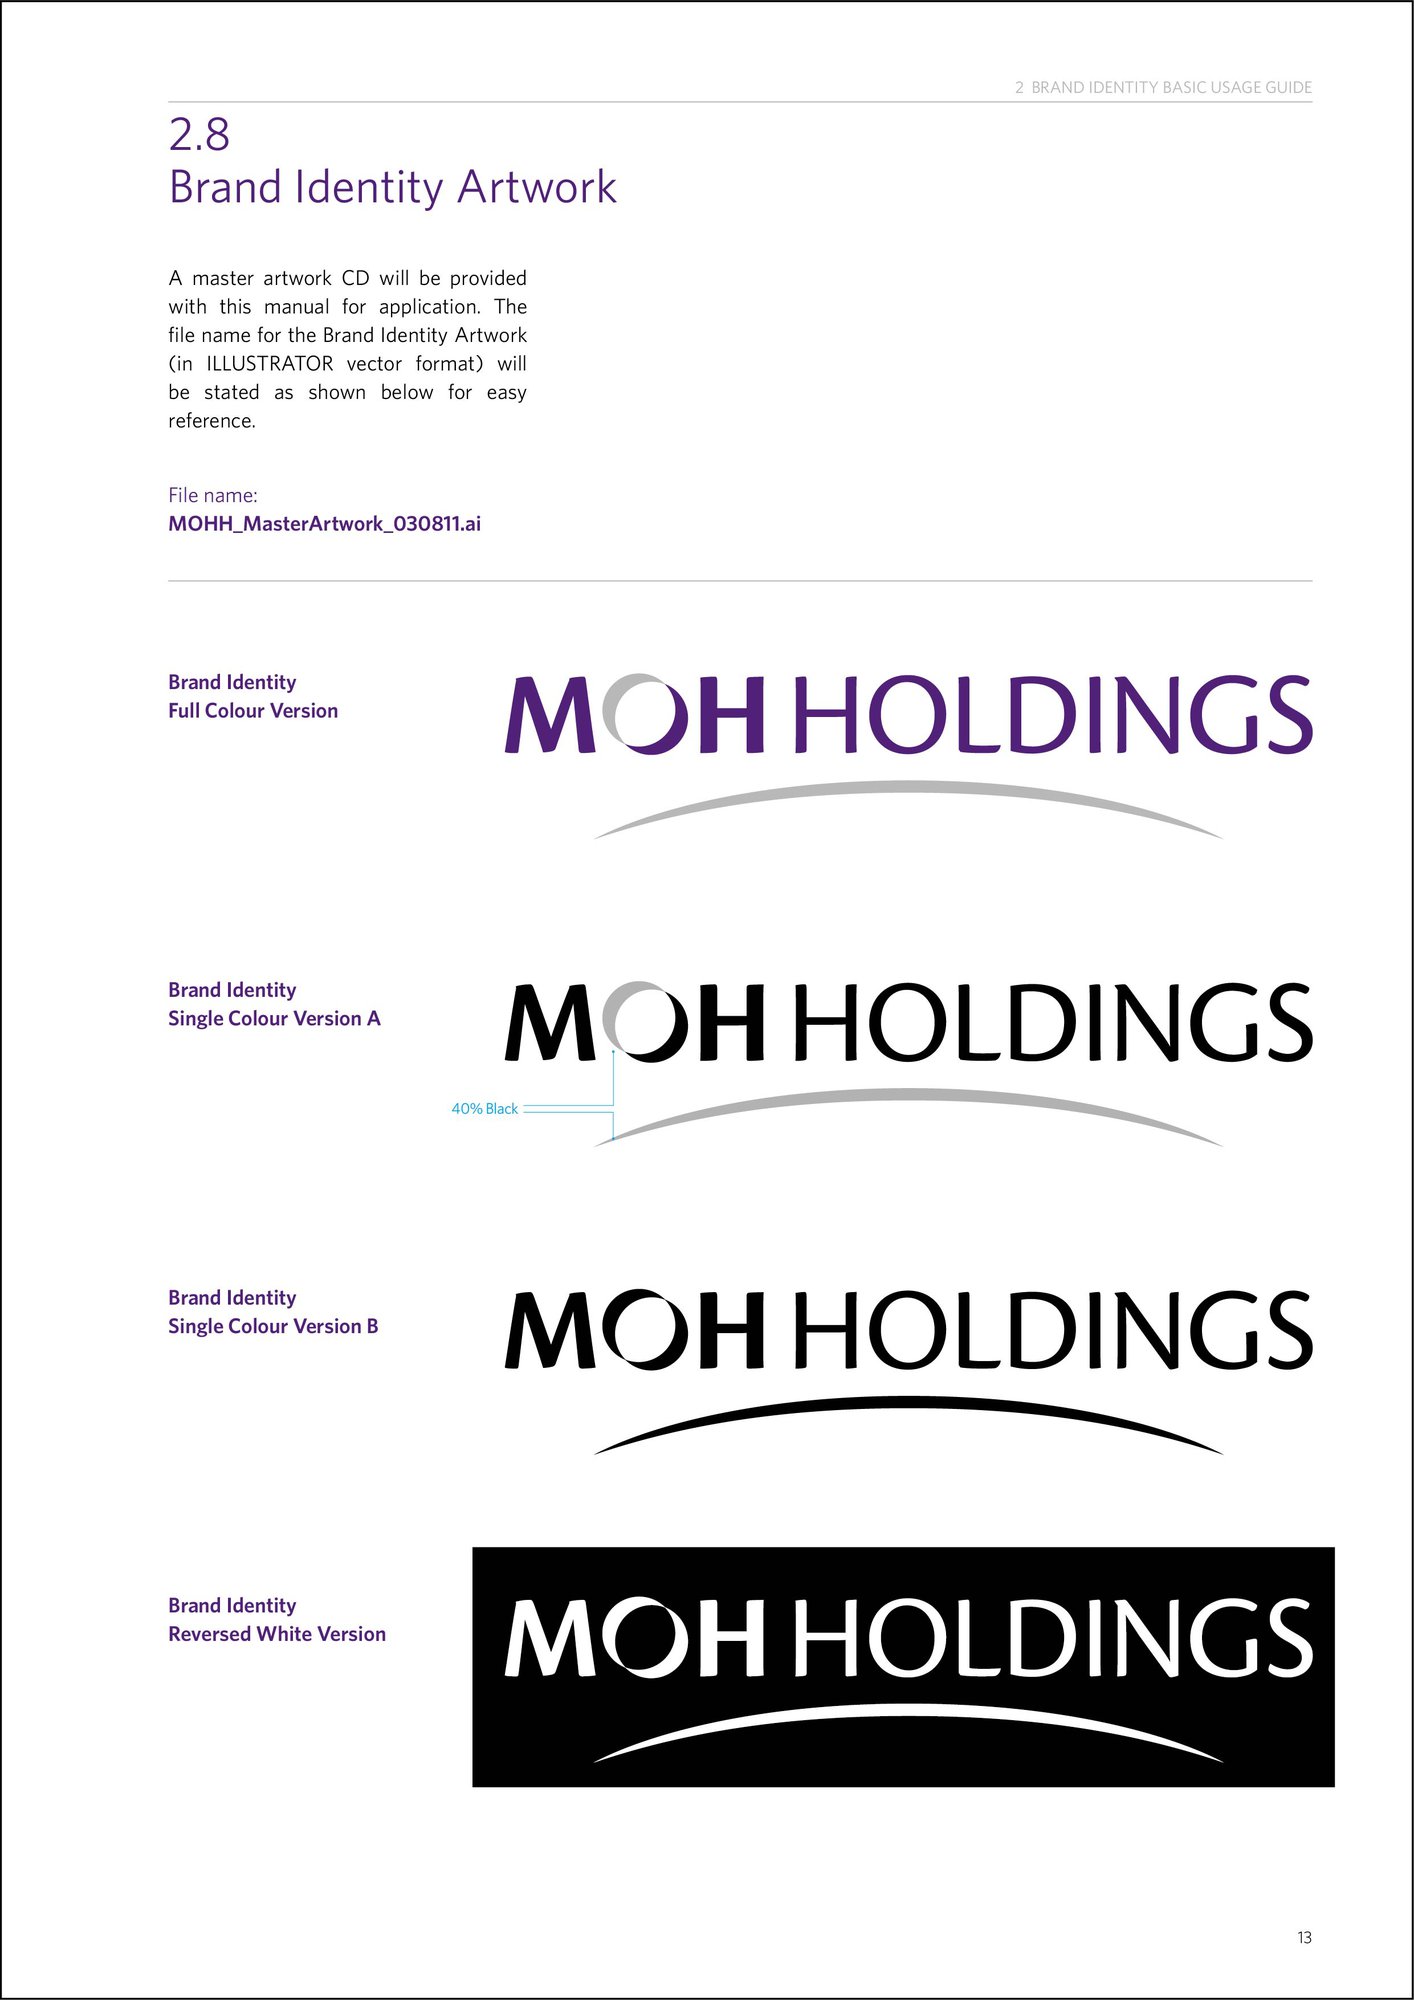 Image of MOH Holdings